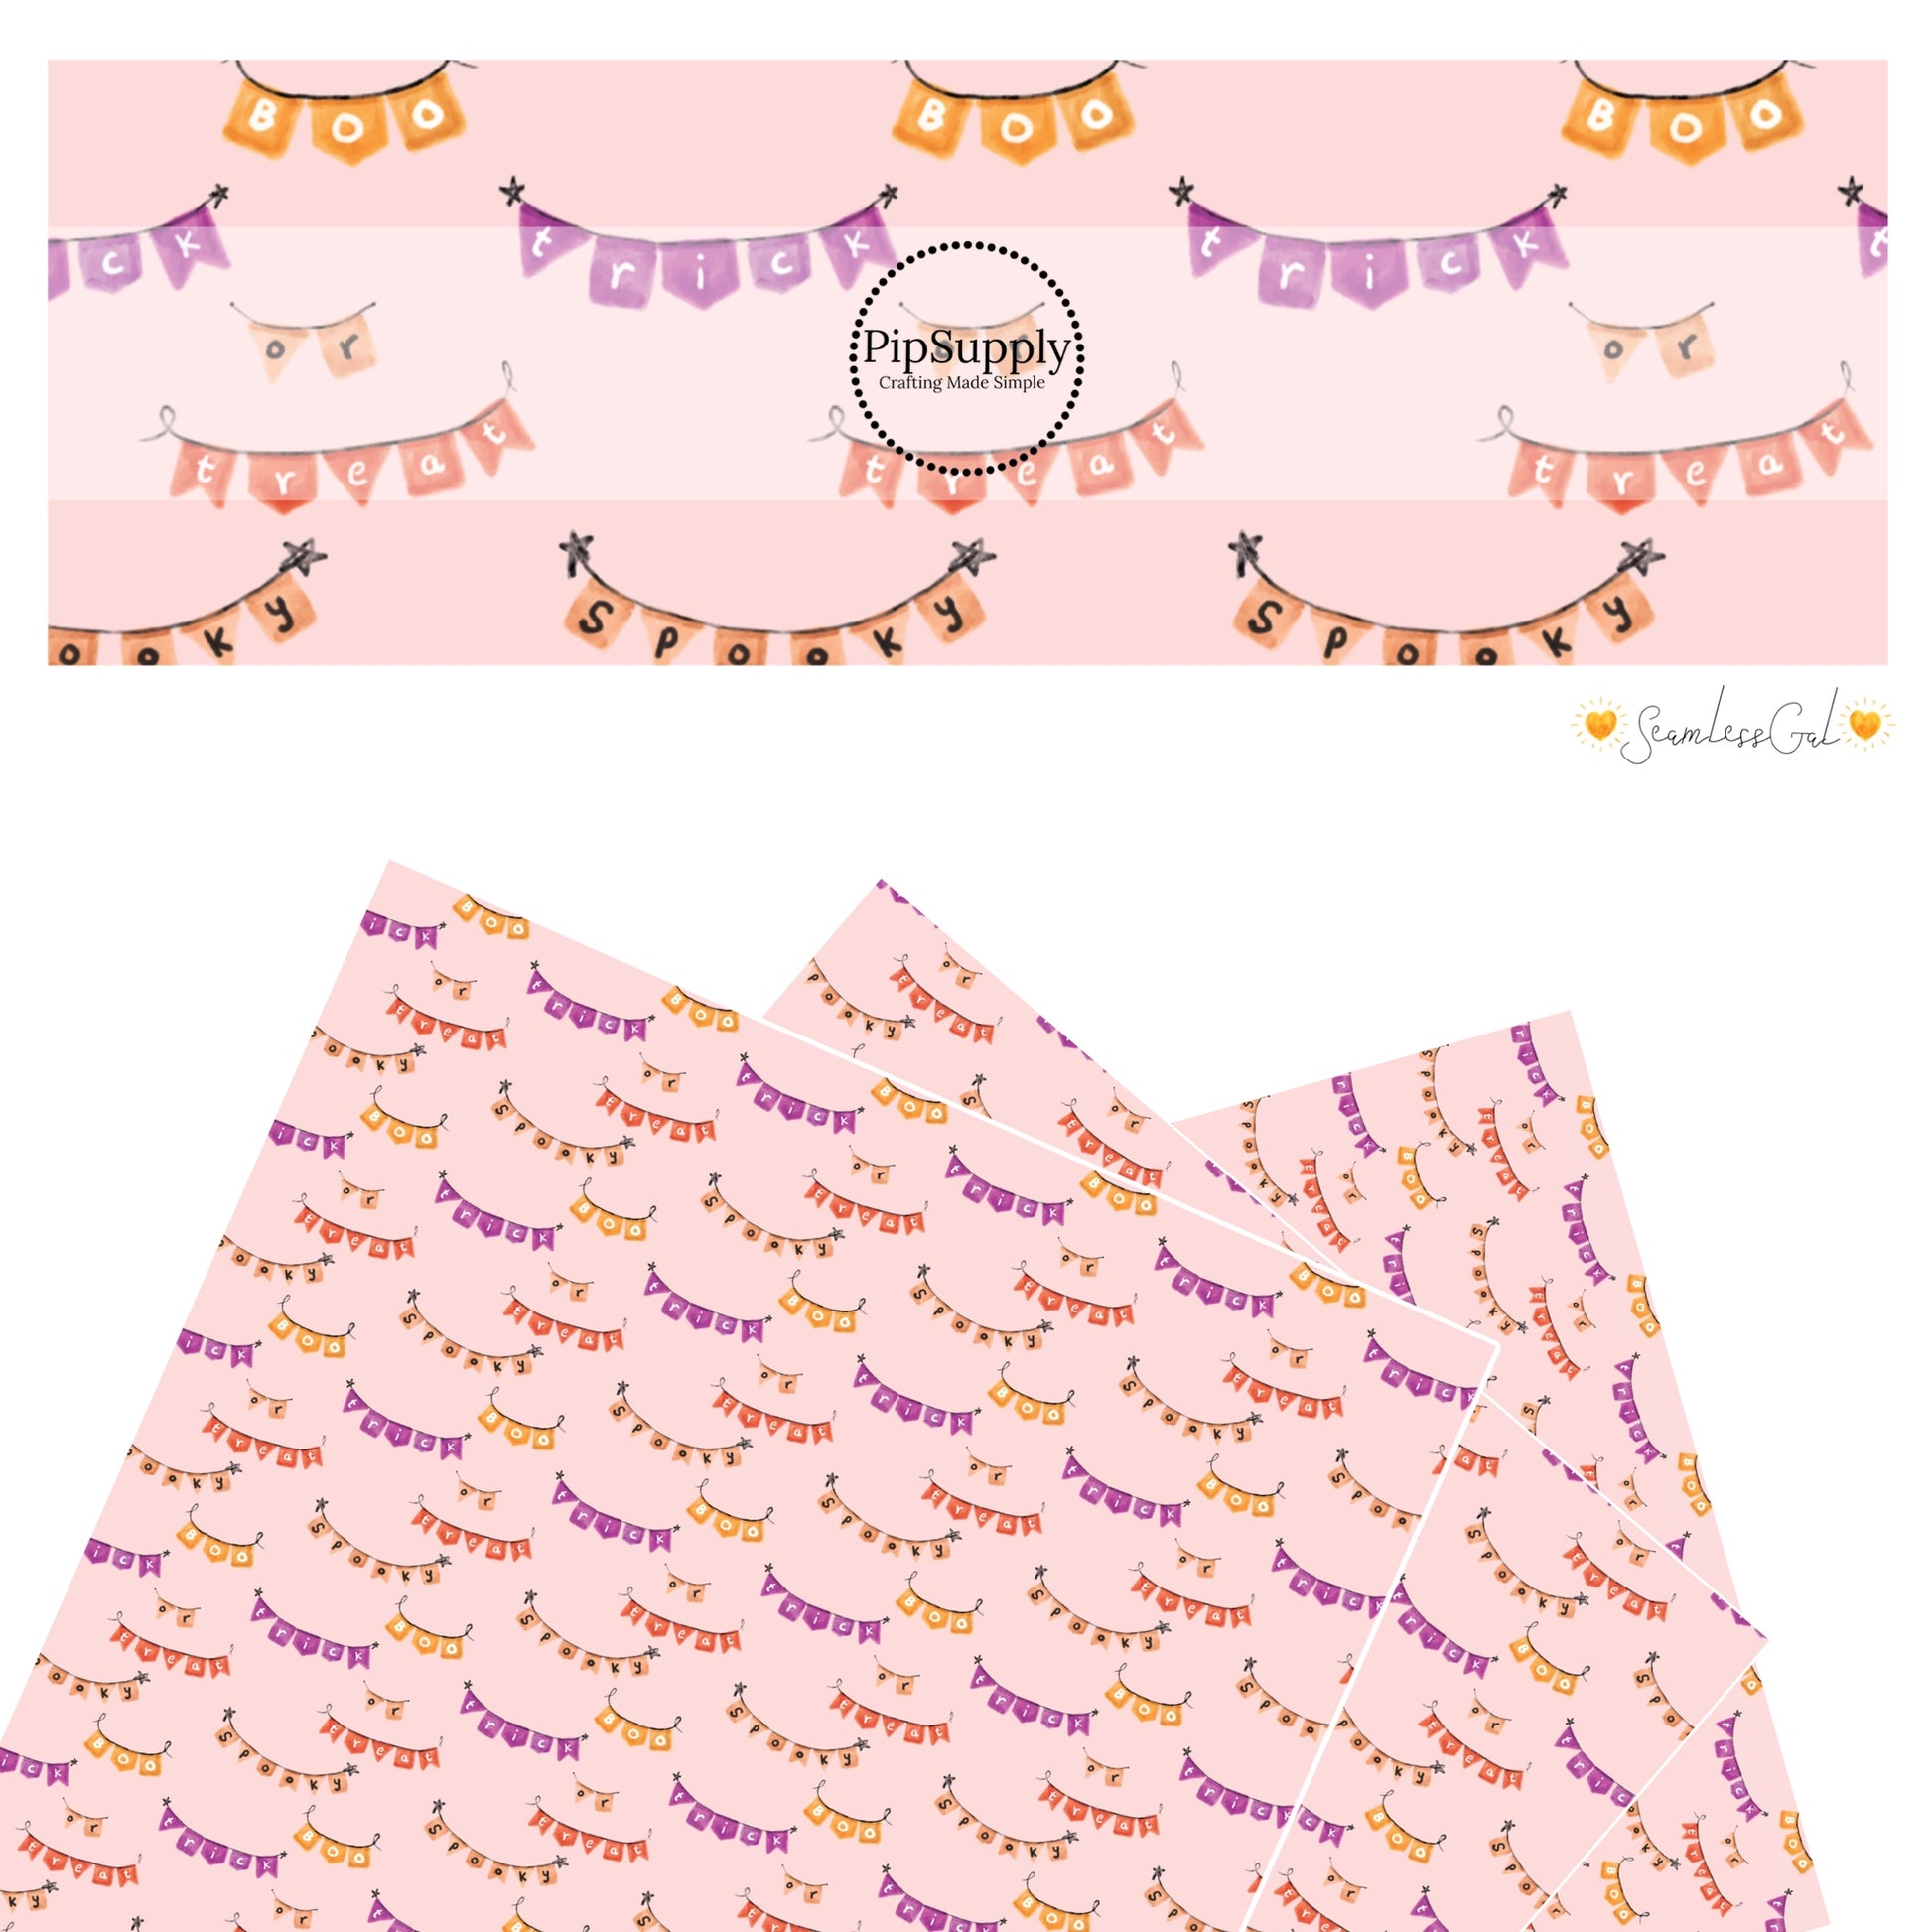 Banners with halloween sayings on pink faux leather sheets